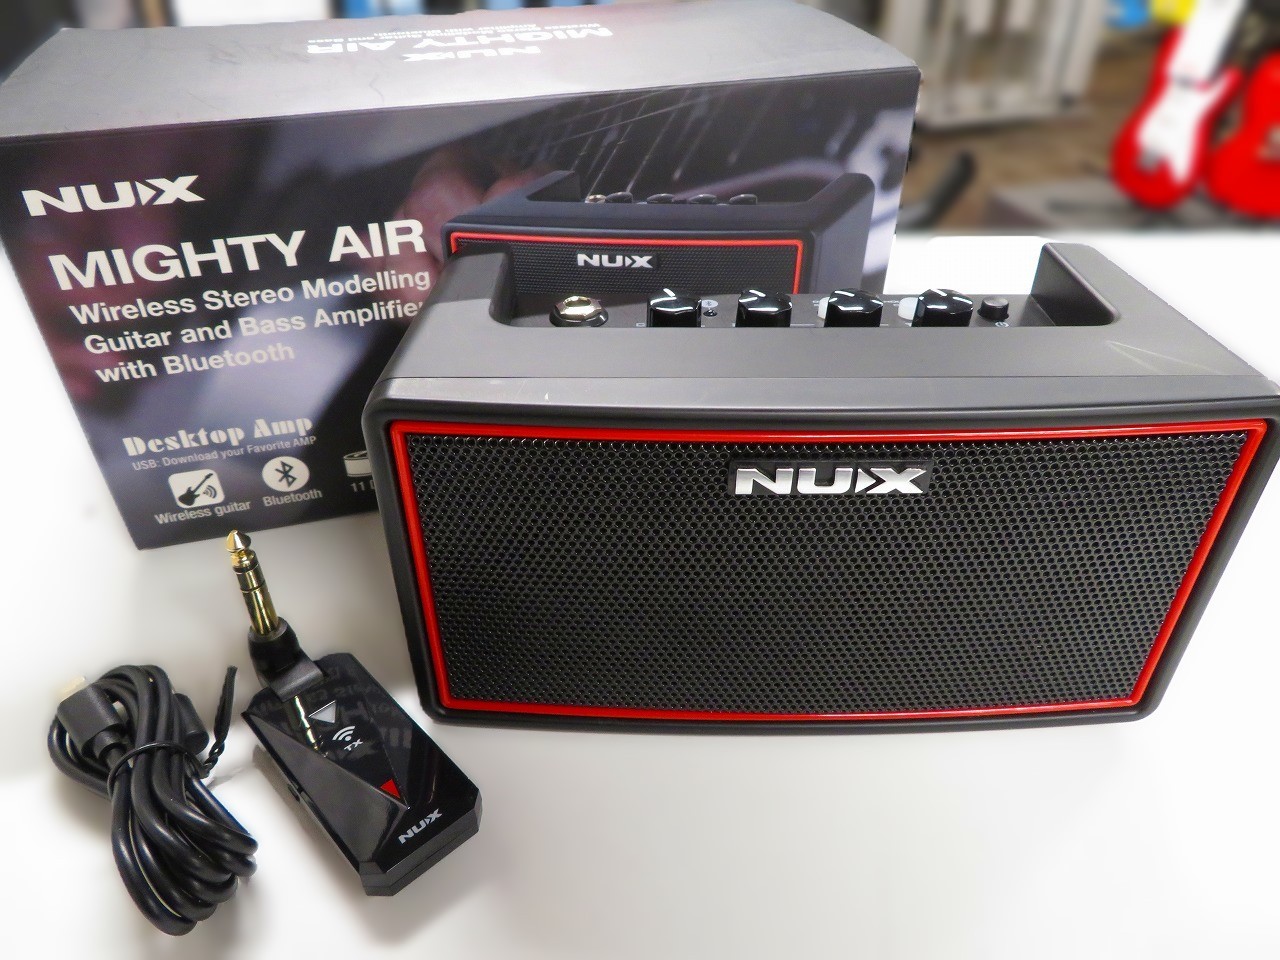 Nux Mighty Air Wireless Amp ワイヤレスギターアンプ